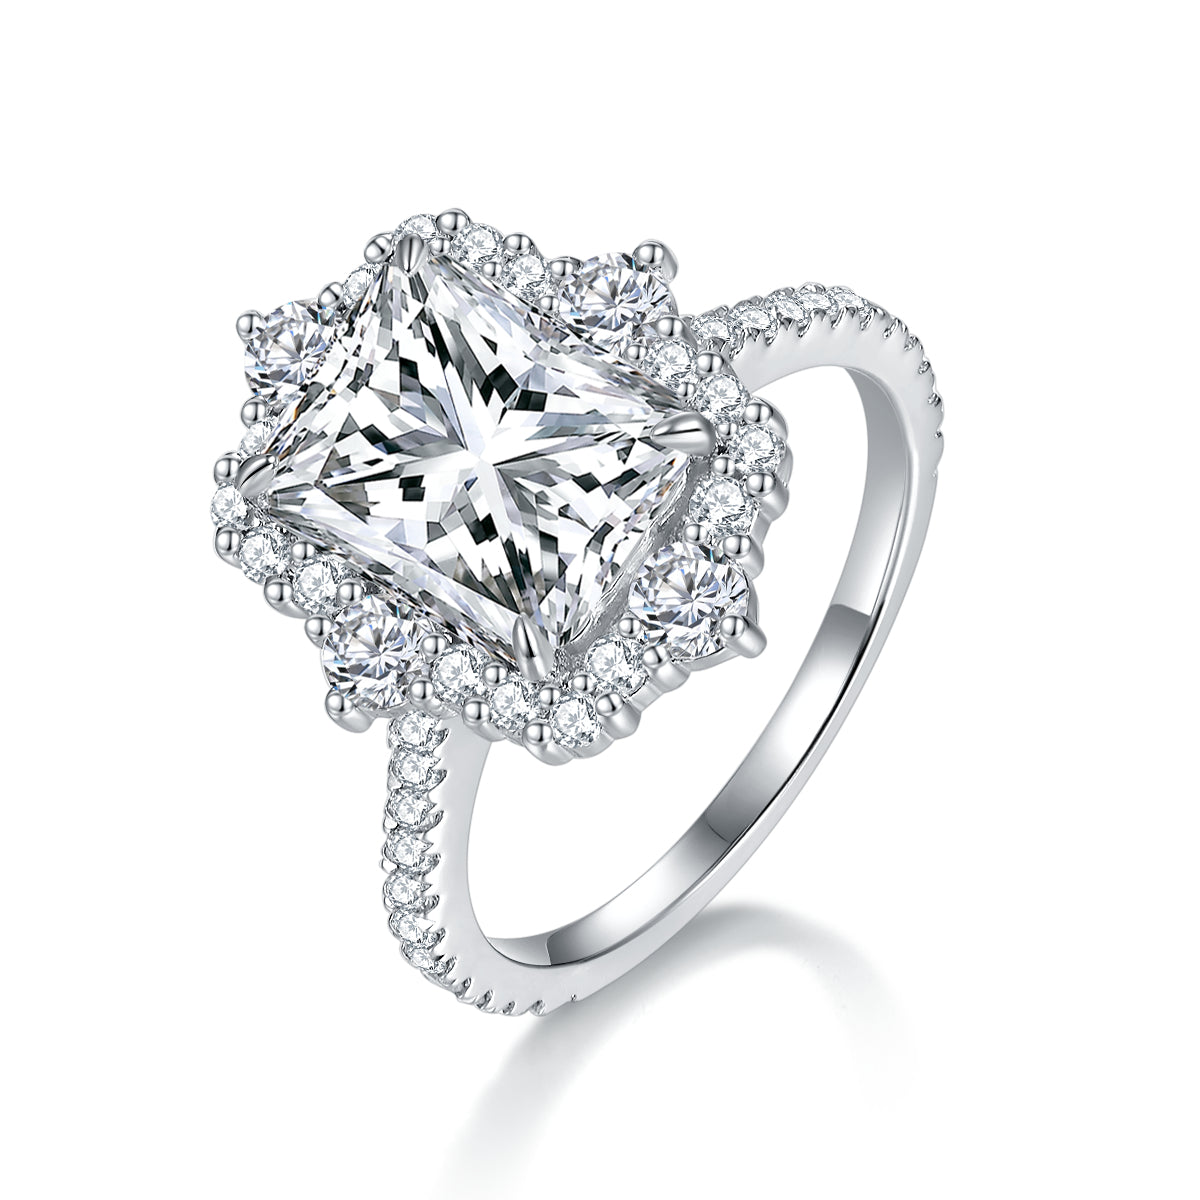 IE0157 RADIANT CUT MOISSANITE ENGANGEMENT RING IN STERLING SILVER